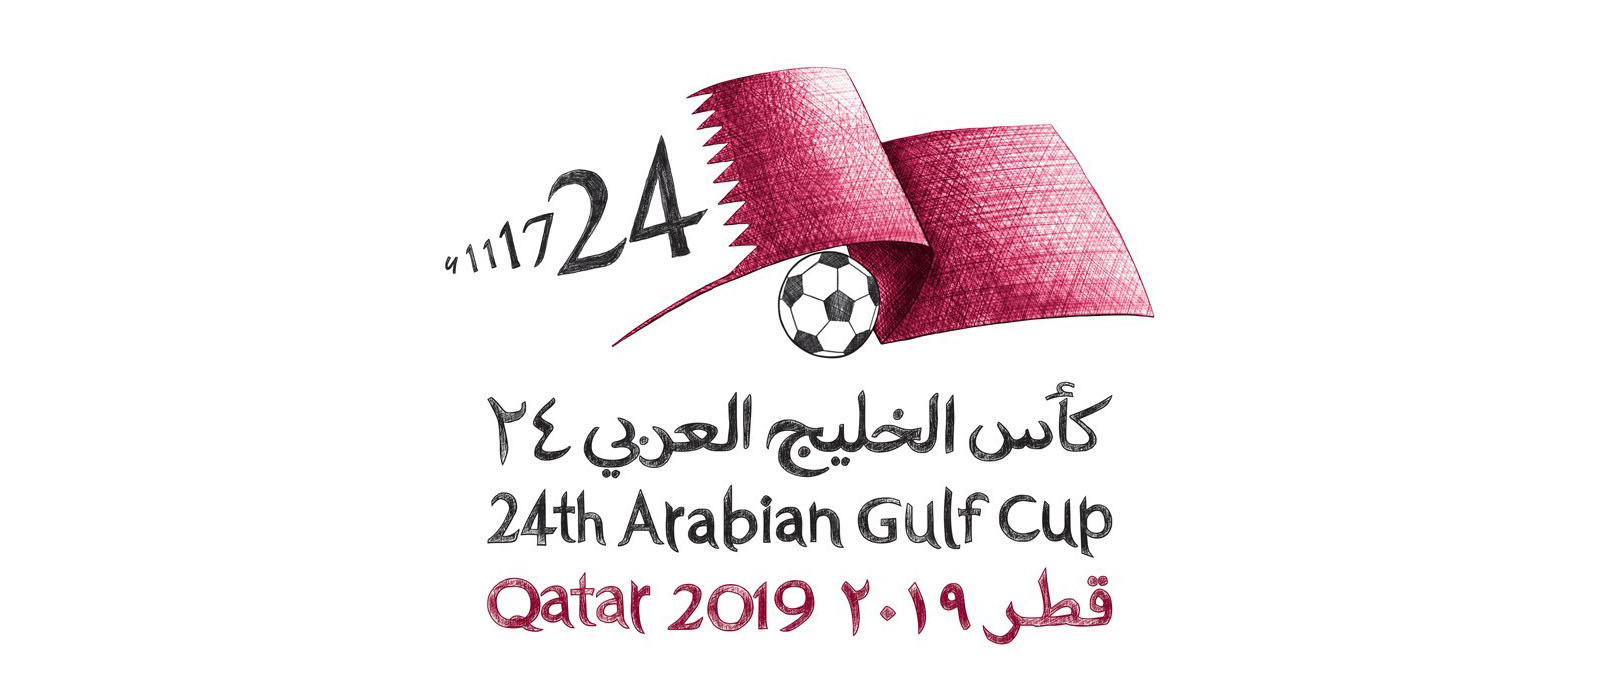 Saudi Arabia vs. Bahrain in 24th Gulf Cup competing for title